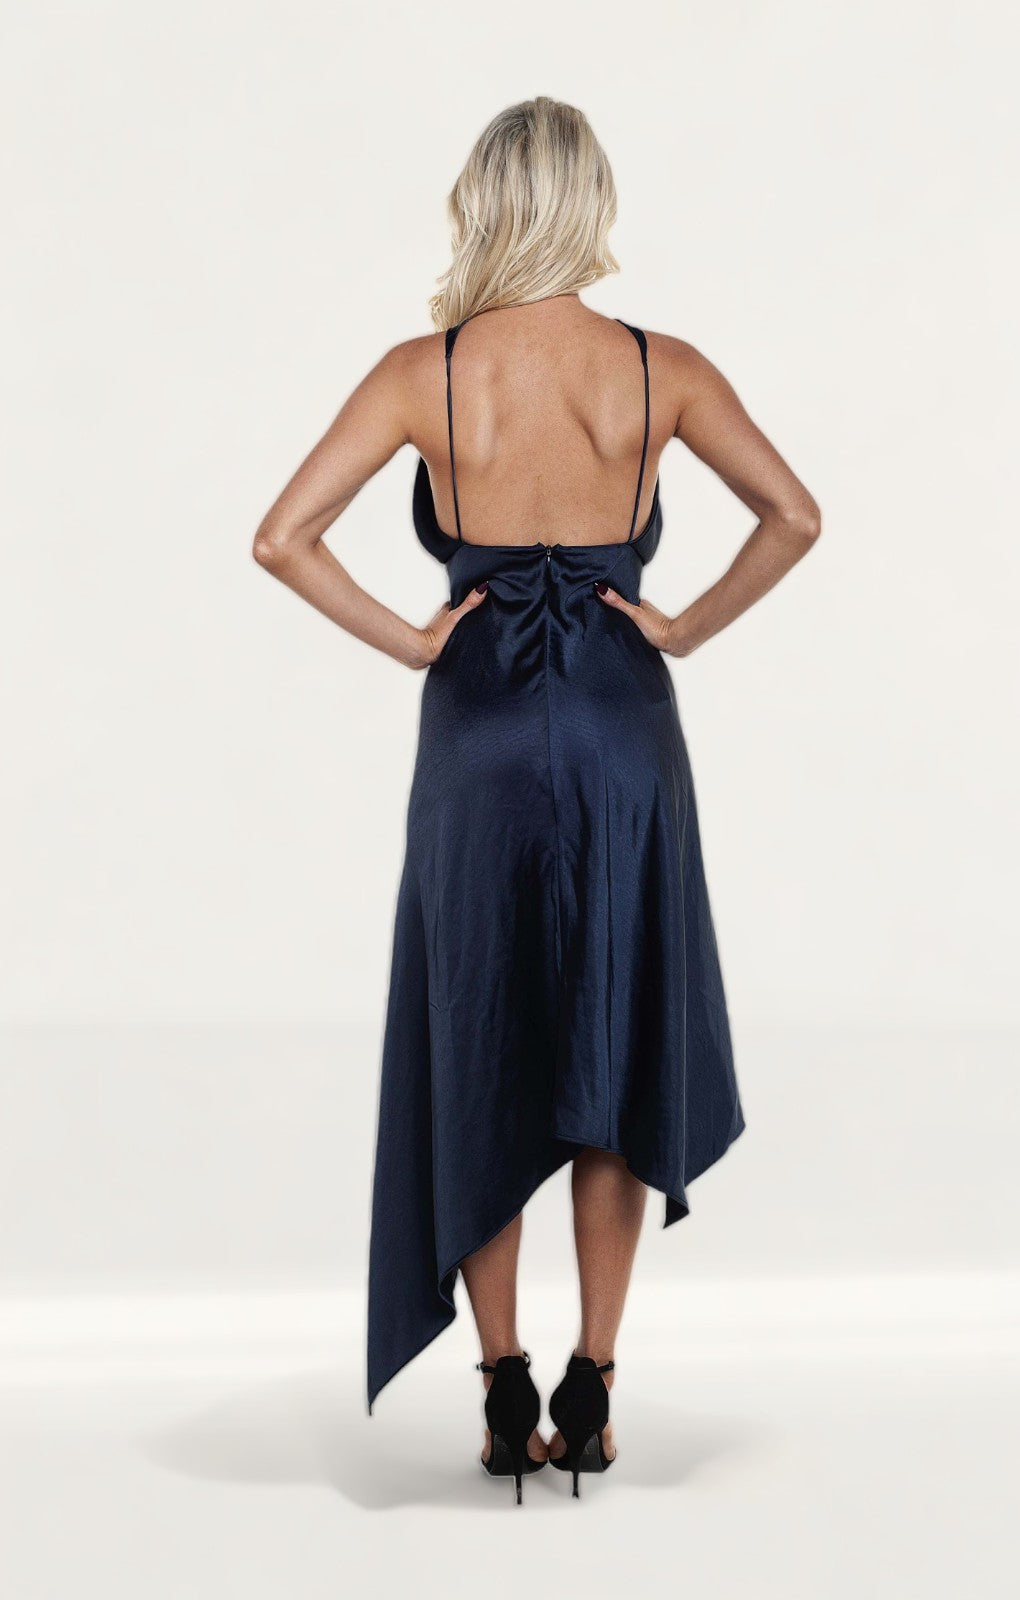 One Fell Swoop Audrey Navy Dress product image